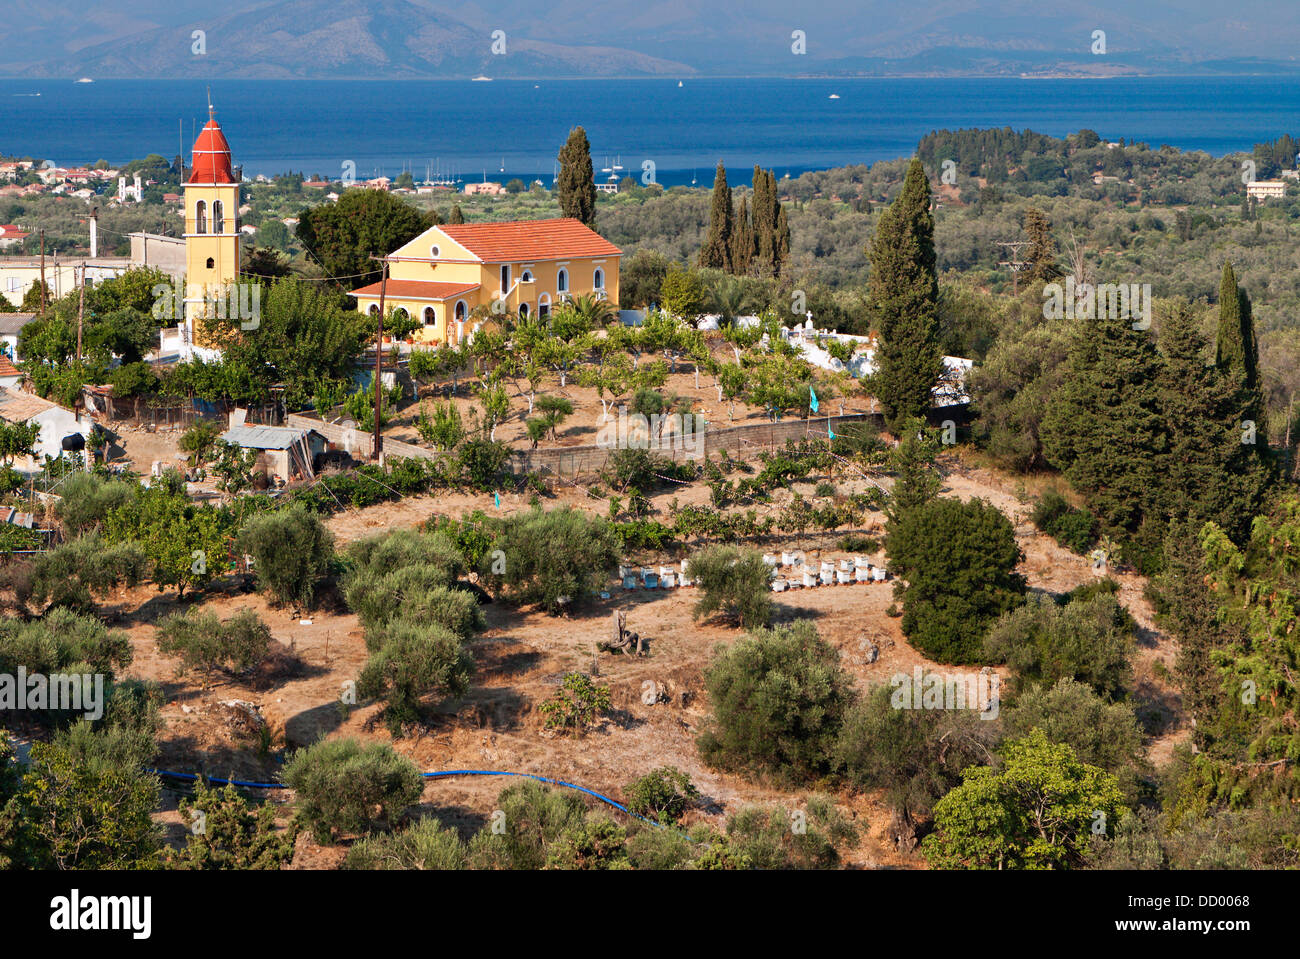 Traditional village and scenery at Corfu island in Greece Stock Photo